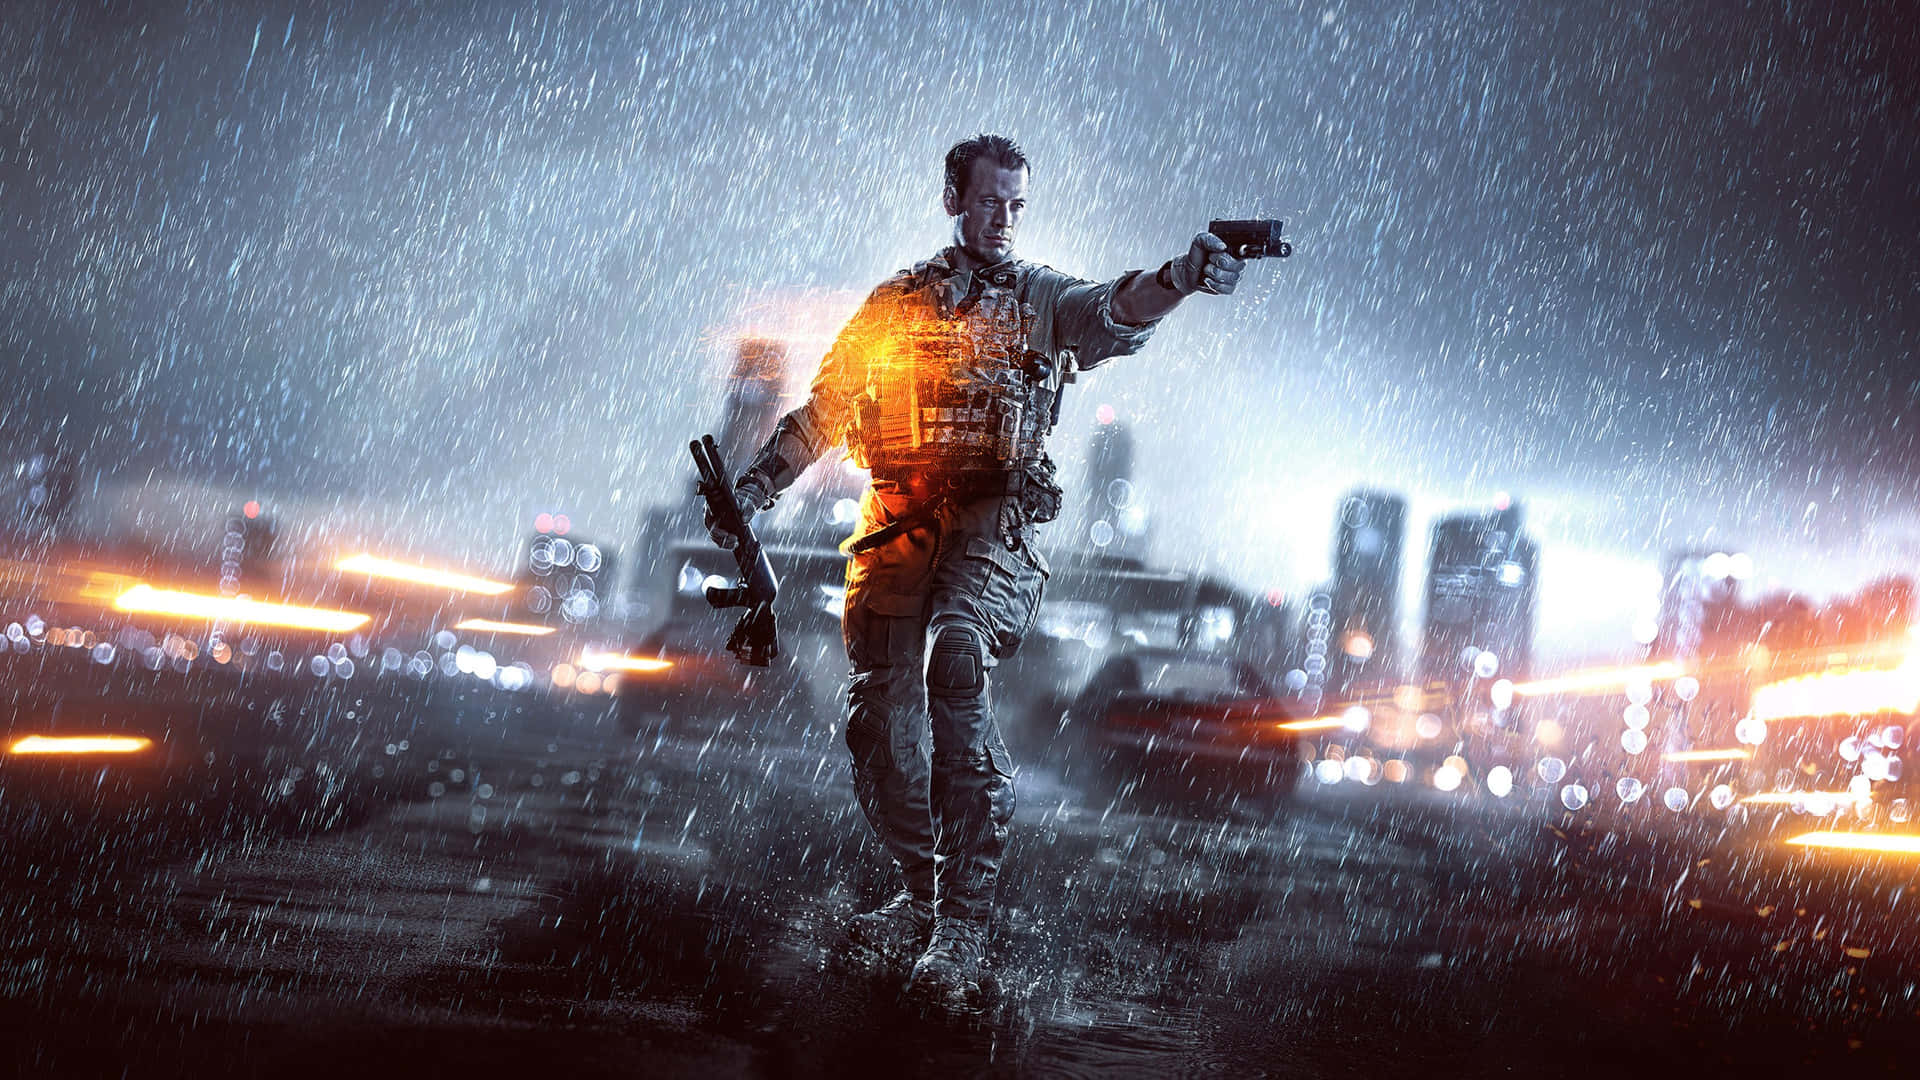 Experience A World of All-Out Warfare With Battlefield 4